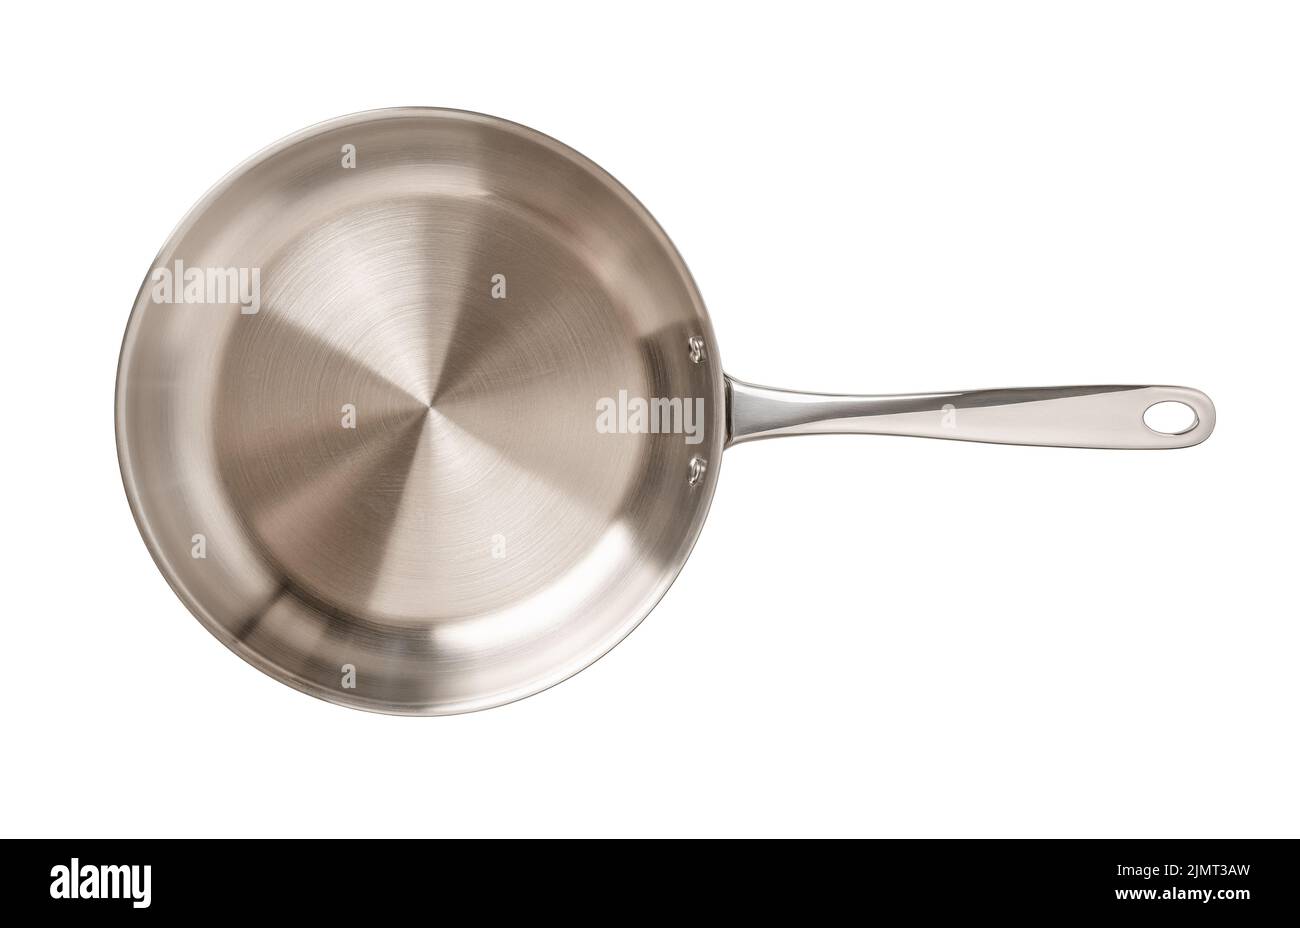 Empty stainless steel skillet isolated on a white background. New frying pan of 18/10 chrome nickel steel cutout. Modern inox cookware. Metal frypan. Stock Photo